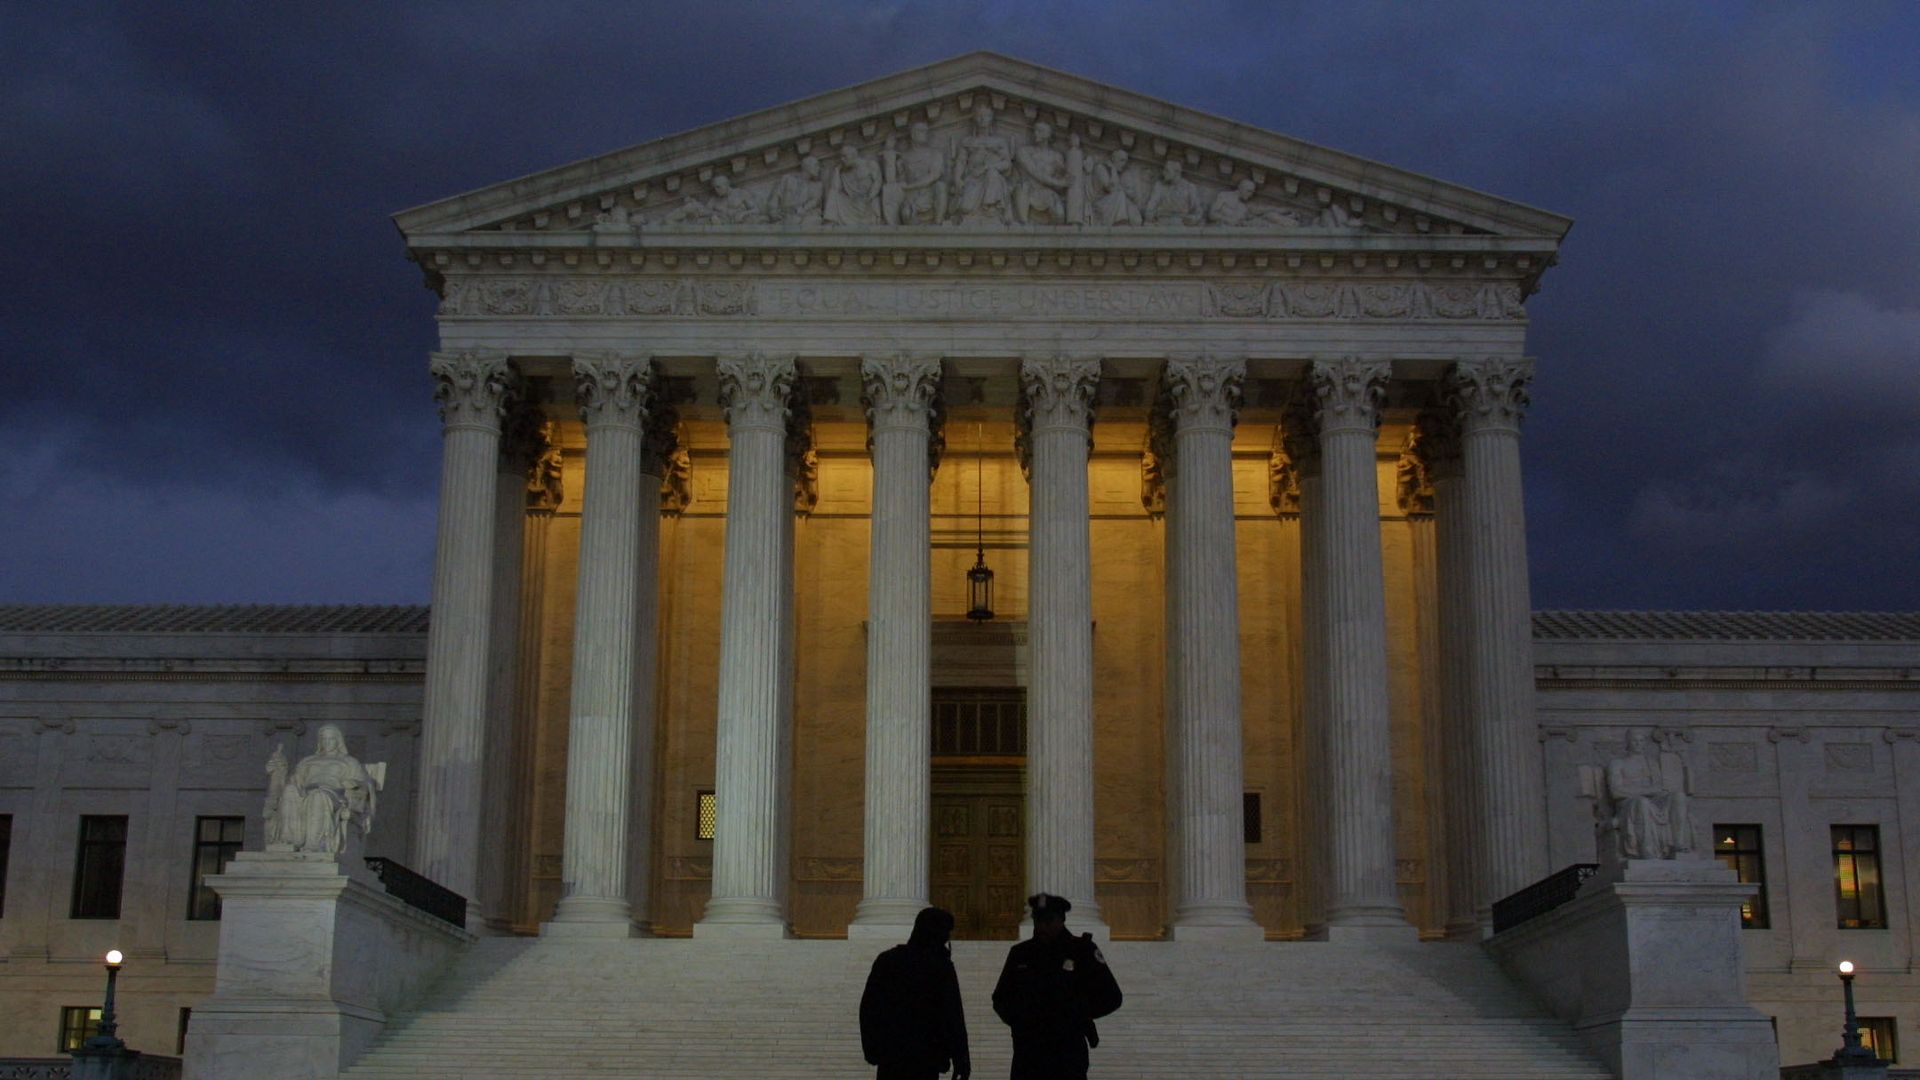 The Supreme Court building at night